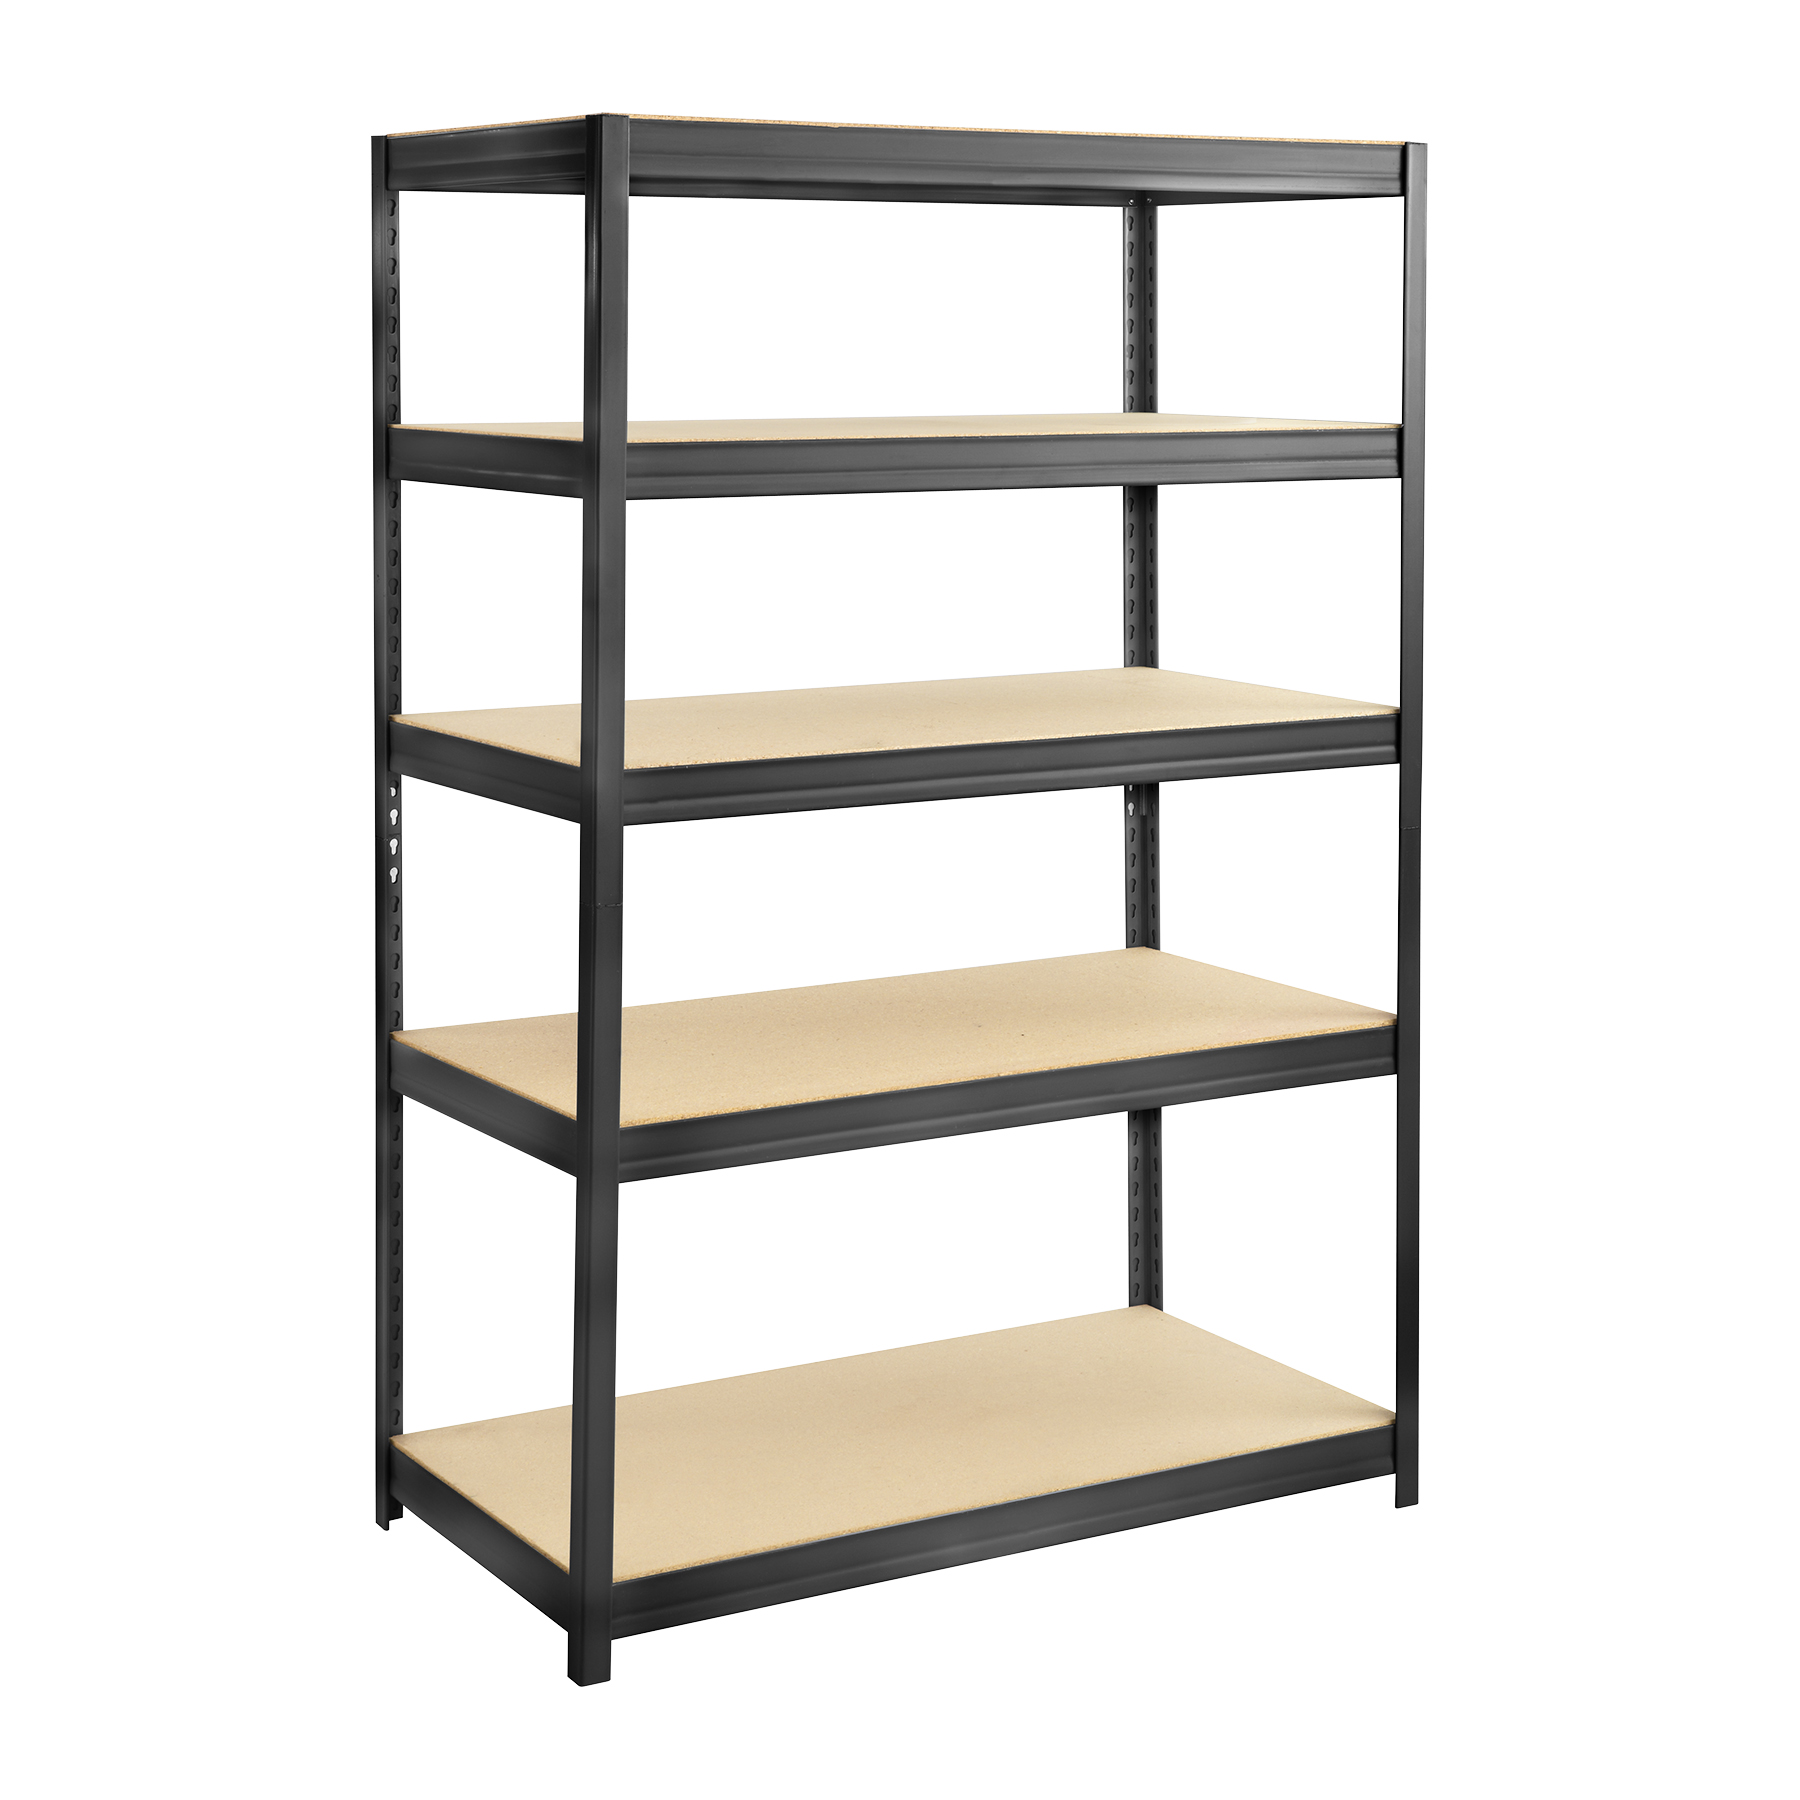 Particleboard Shelving 48x24, How To Put Together Metal Shelving